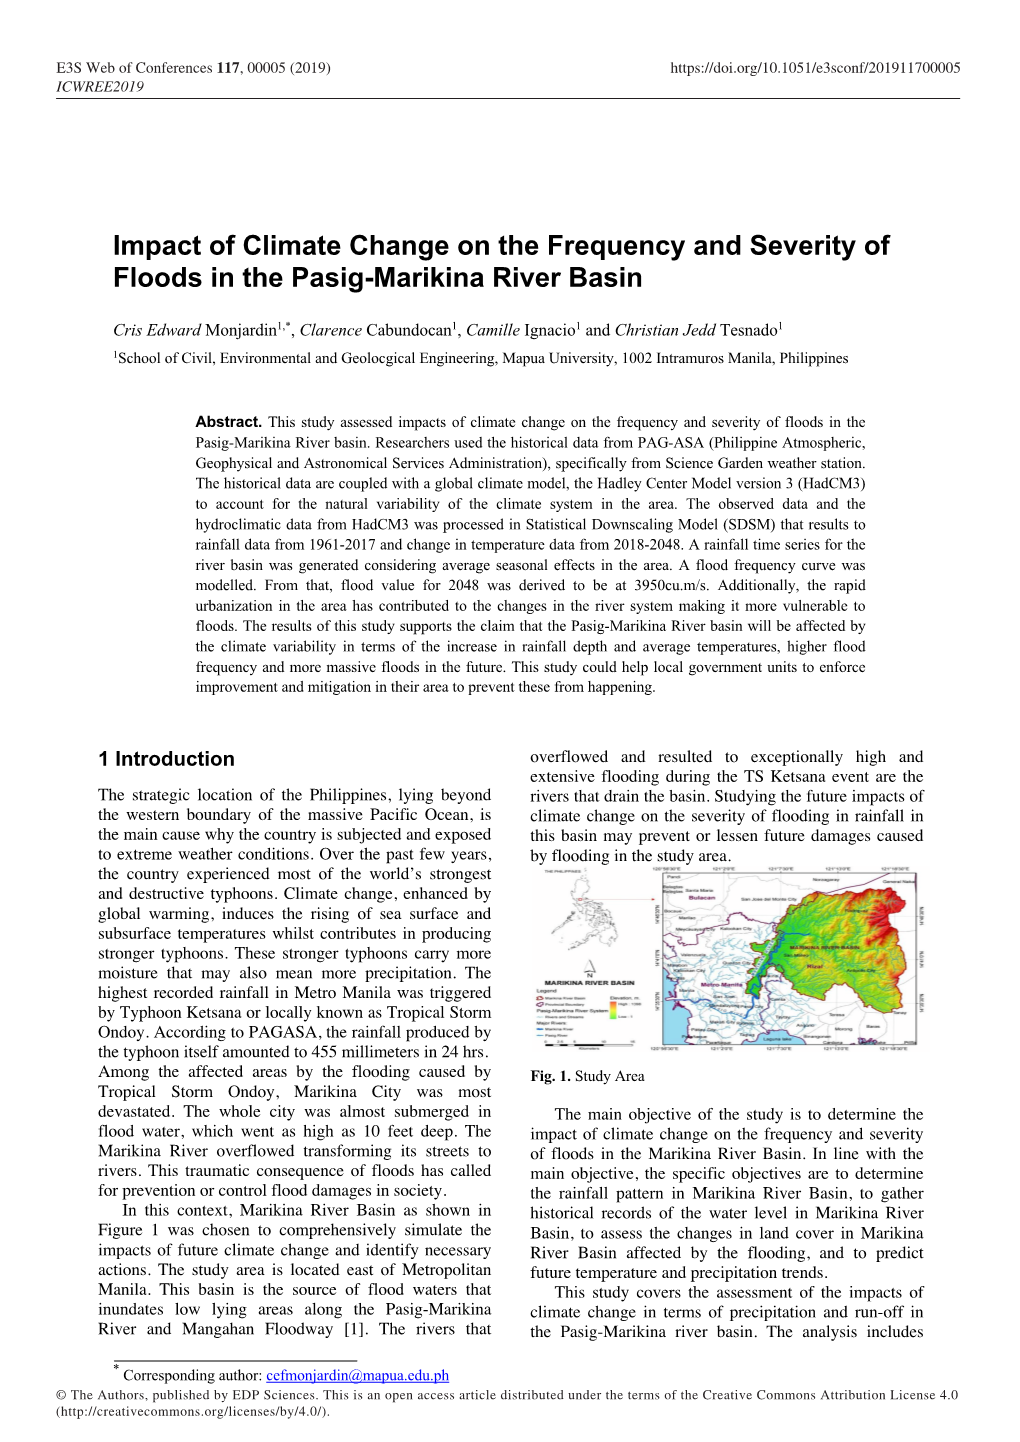 Impact of Climate Change on the Frequency and Severity of Floods in the Pasig-Marikina River Basin